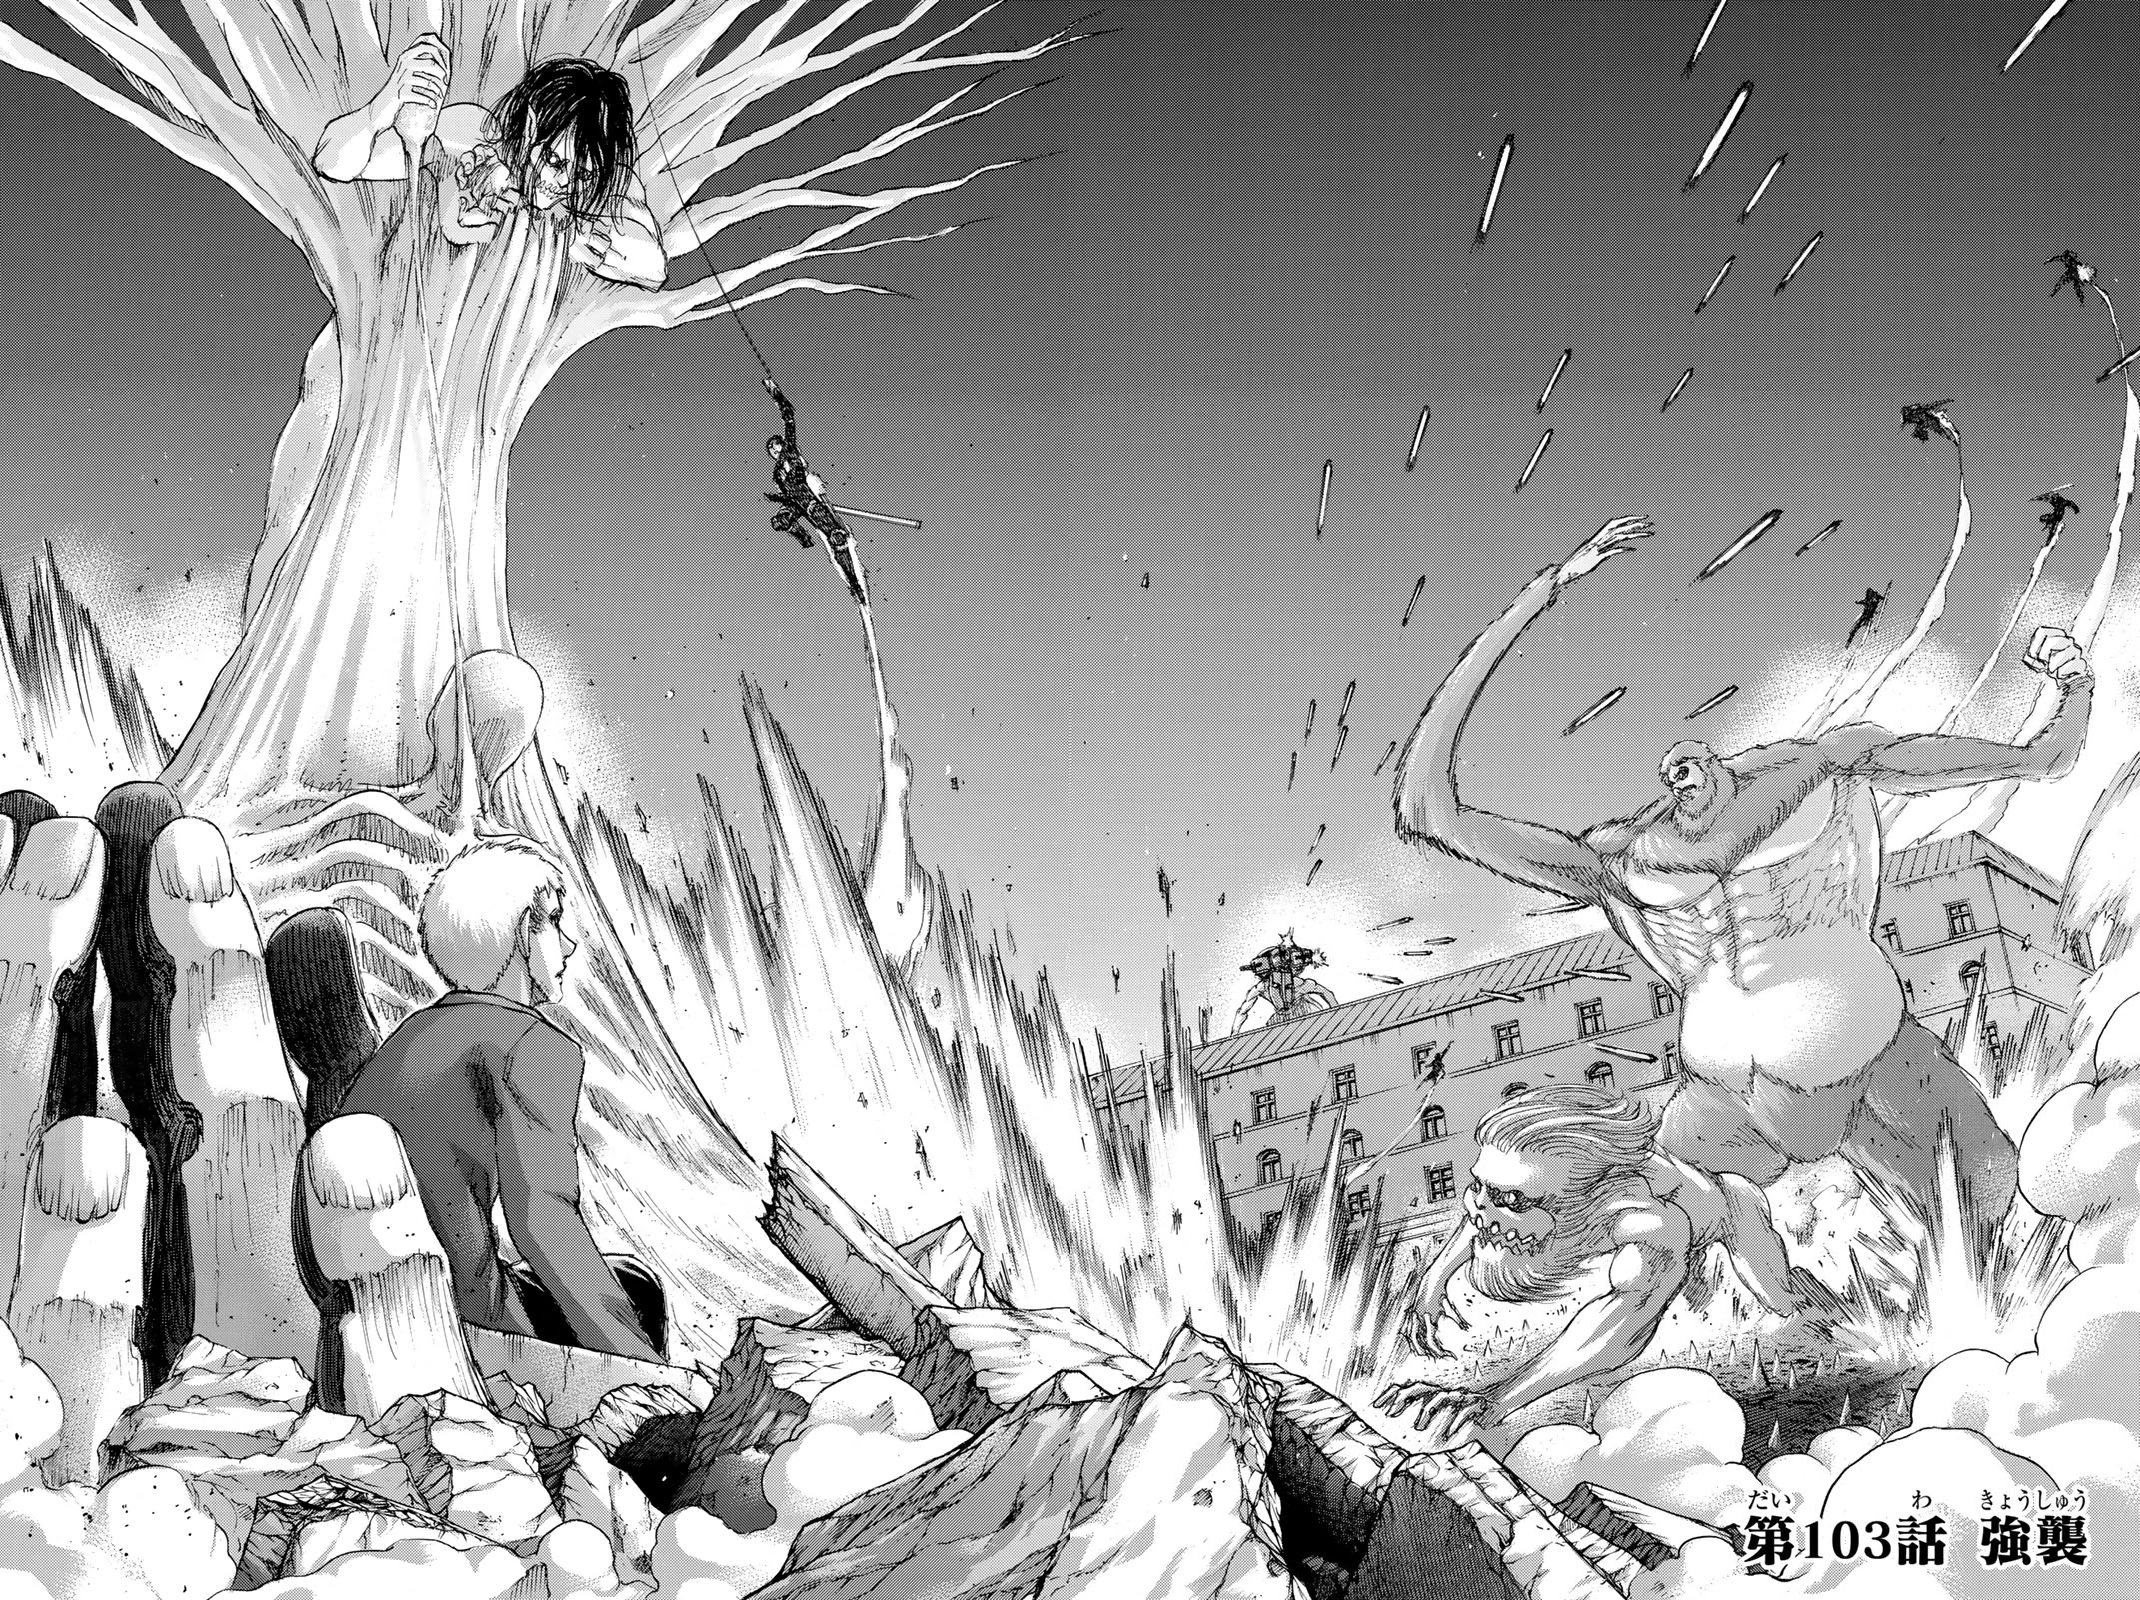 Attack on Titan Wiki - Attack on Titan Wiki Website Featured Image